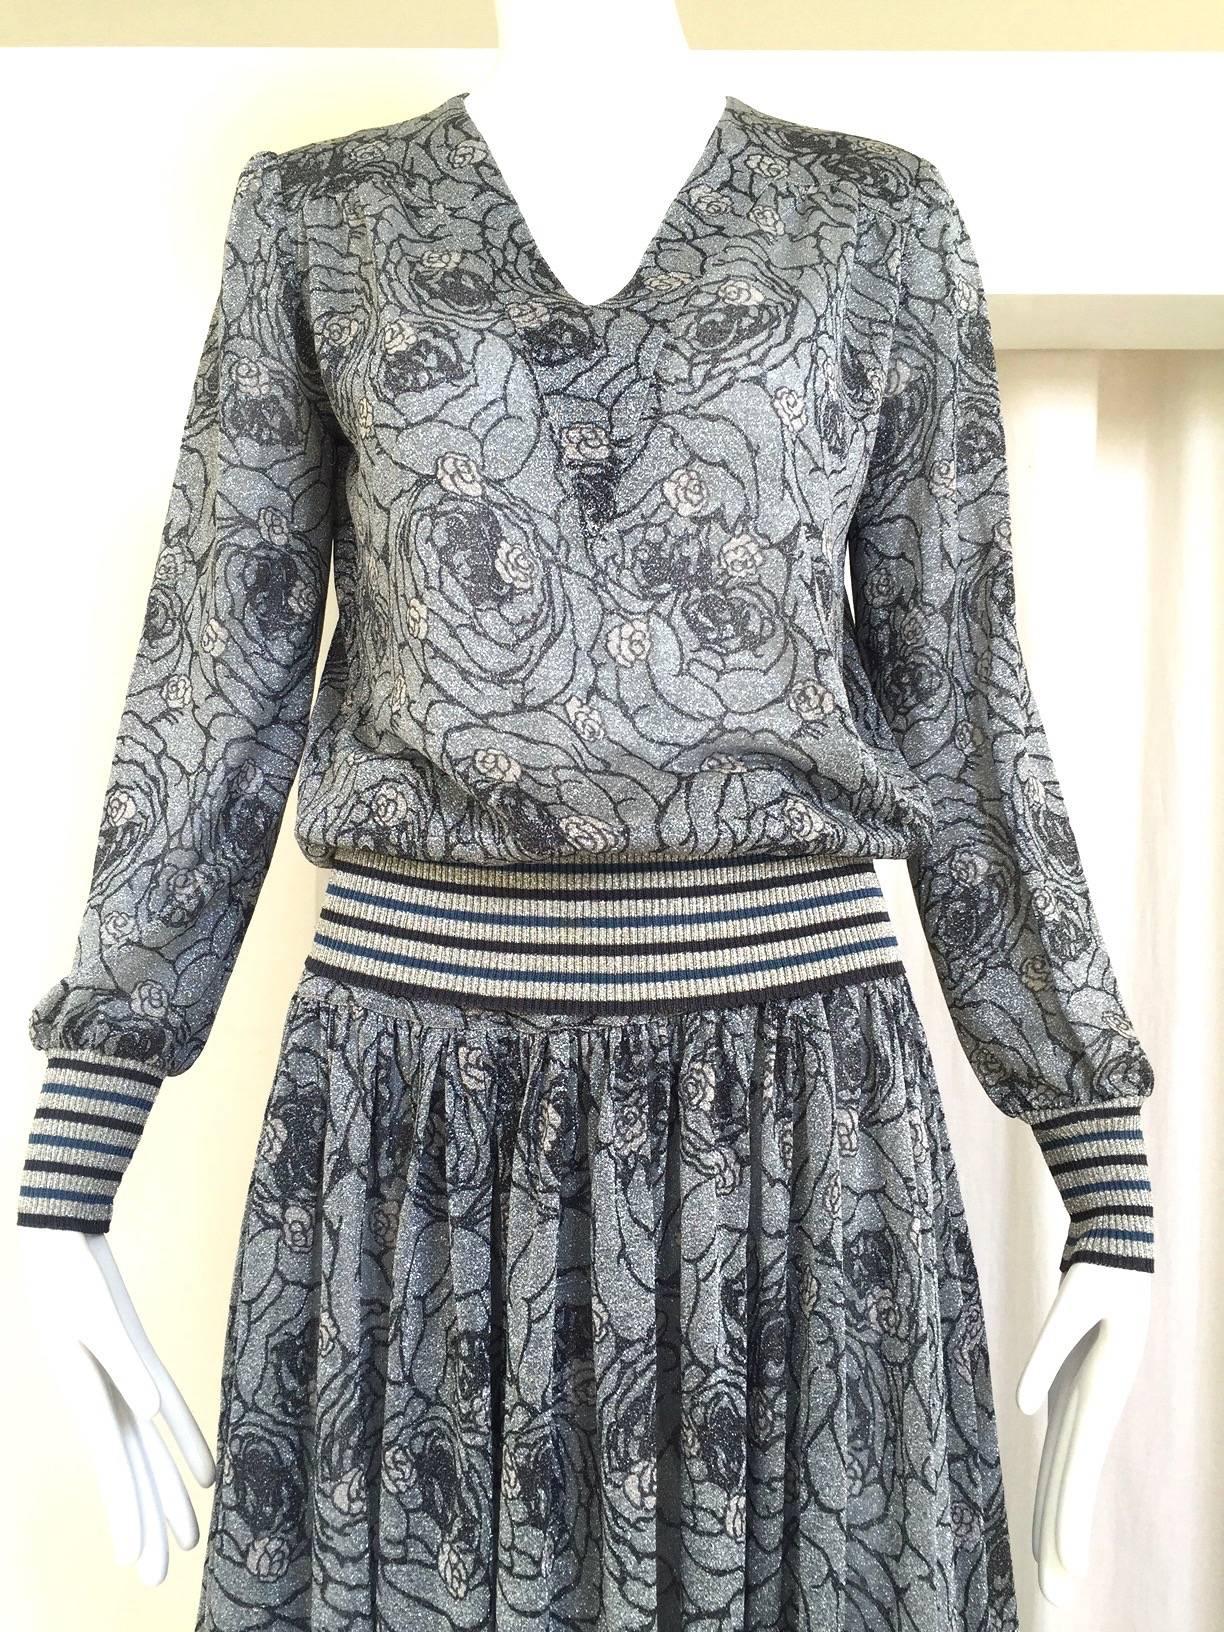 70s Missoni metallic grey and blue knit top and skirt set.
Top: Bust stretch up to 38